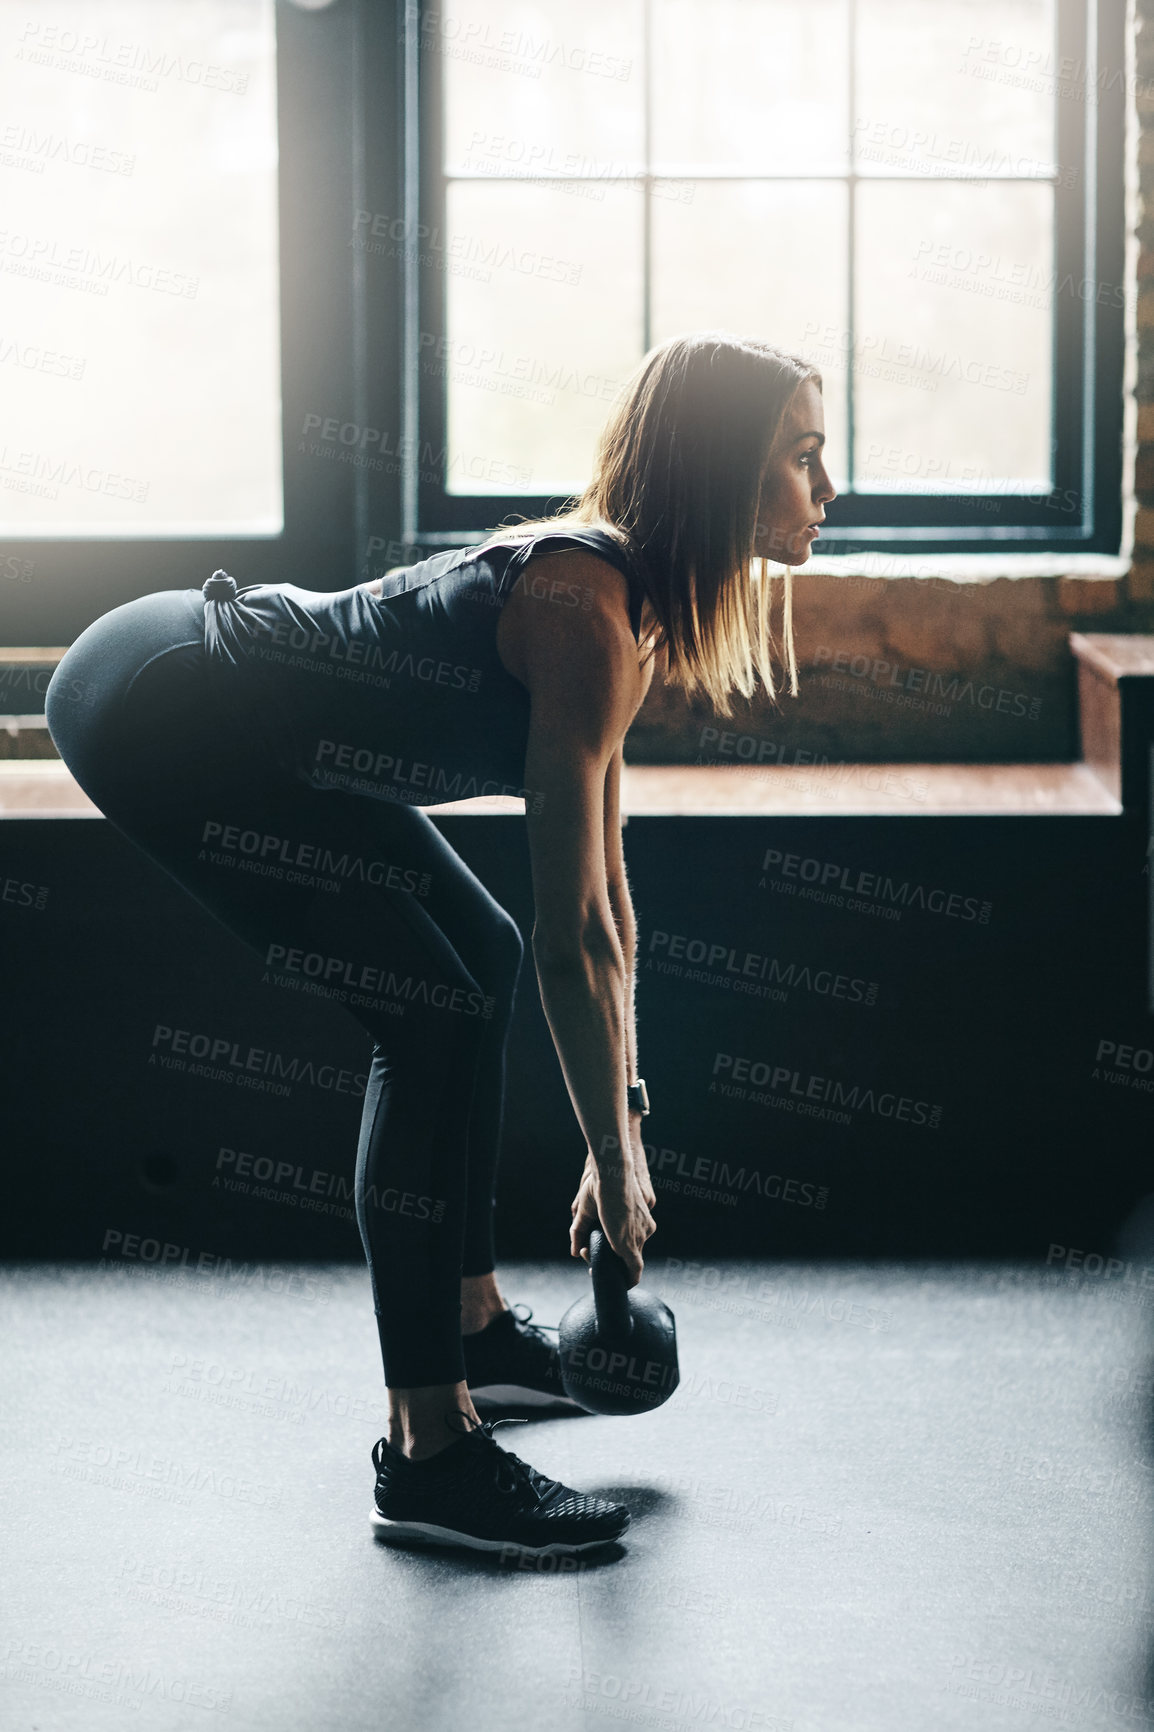 Buy stock photo Shot of a young woman working out with a kettle bell in a gym